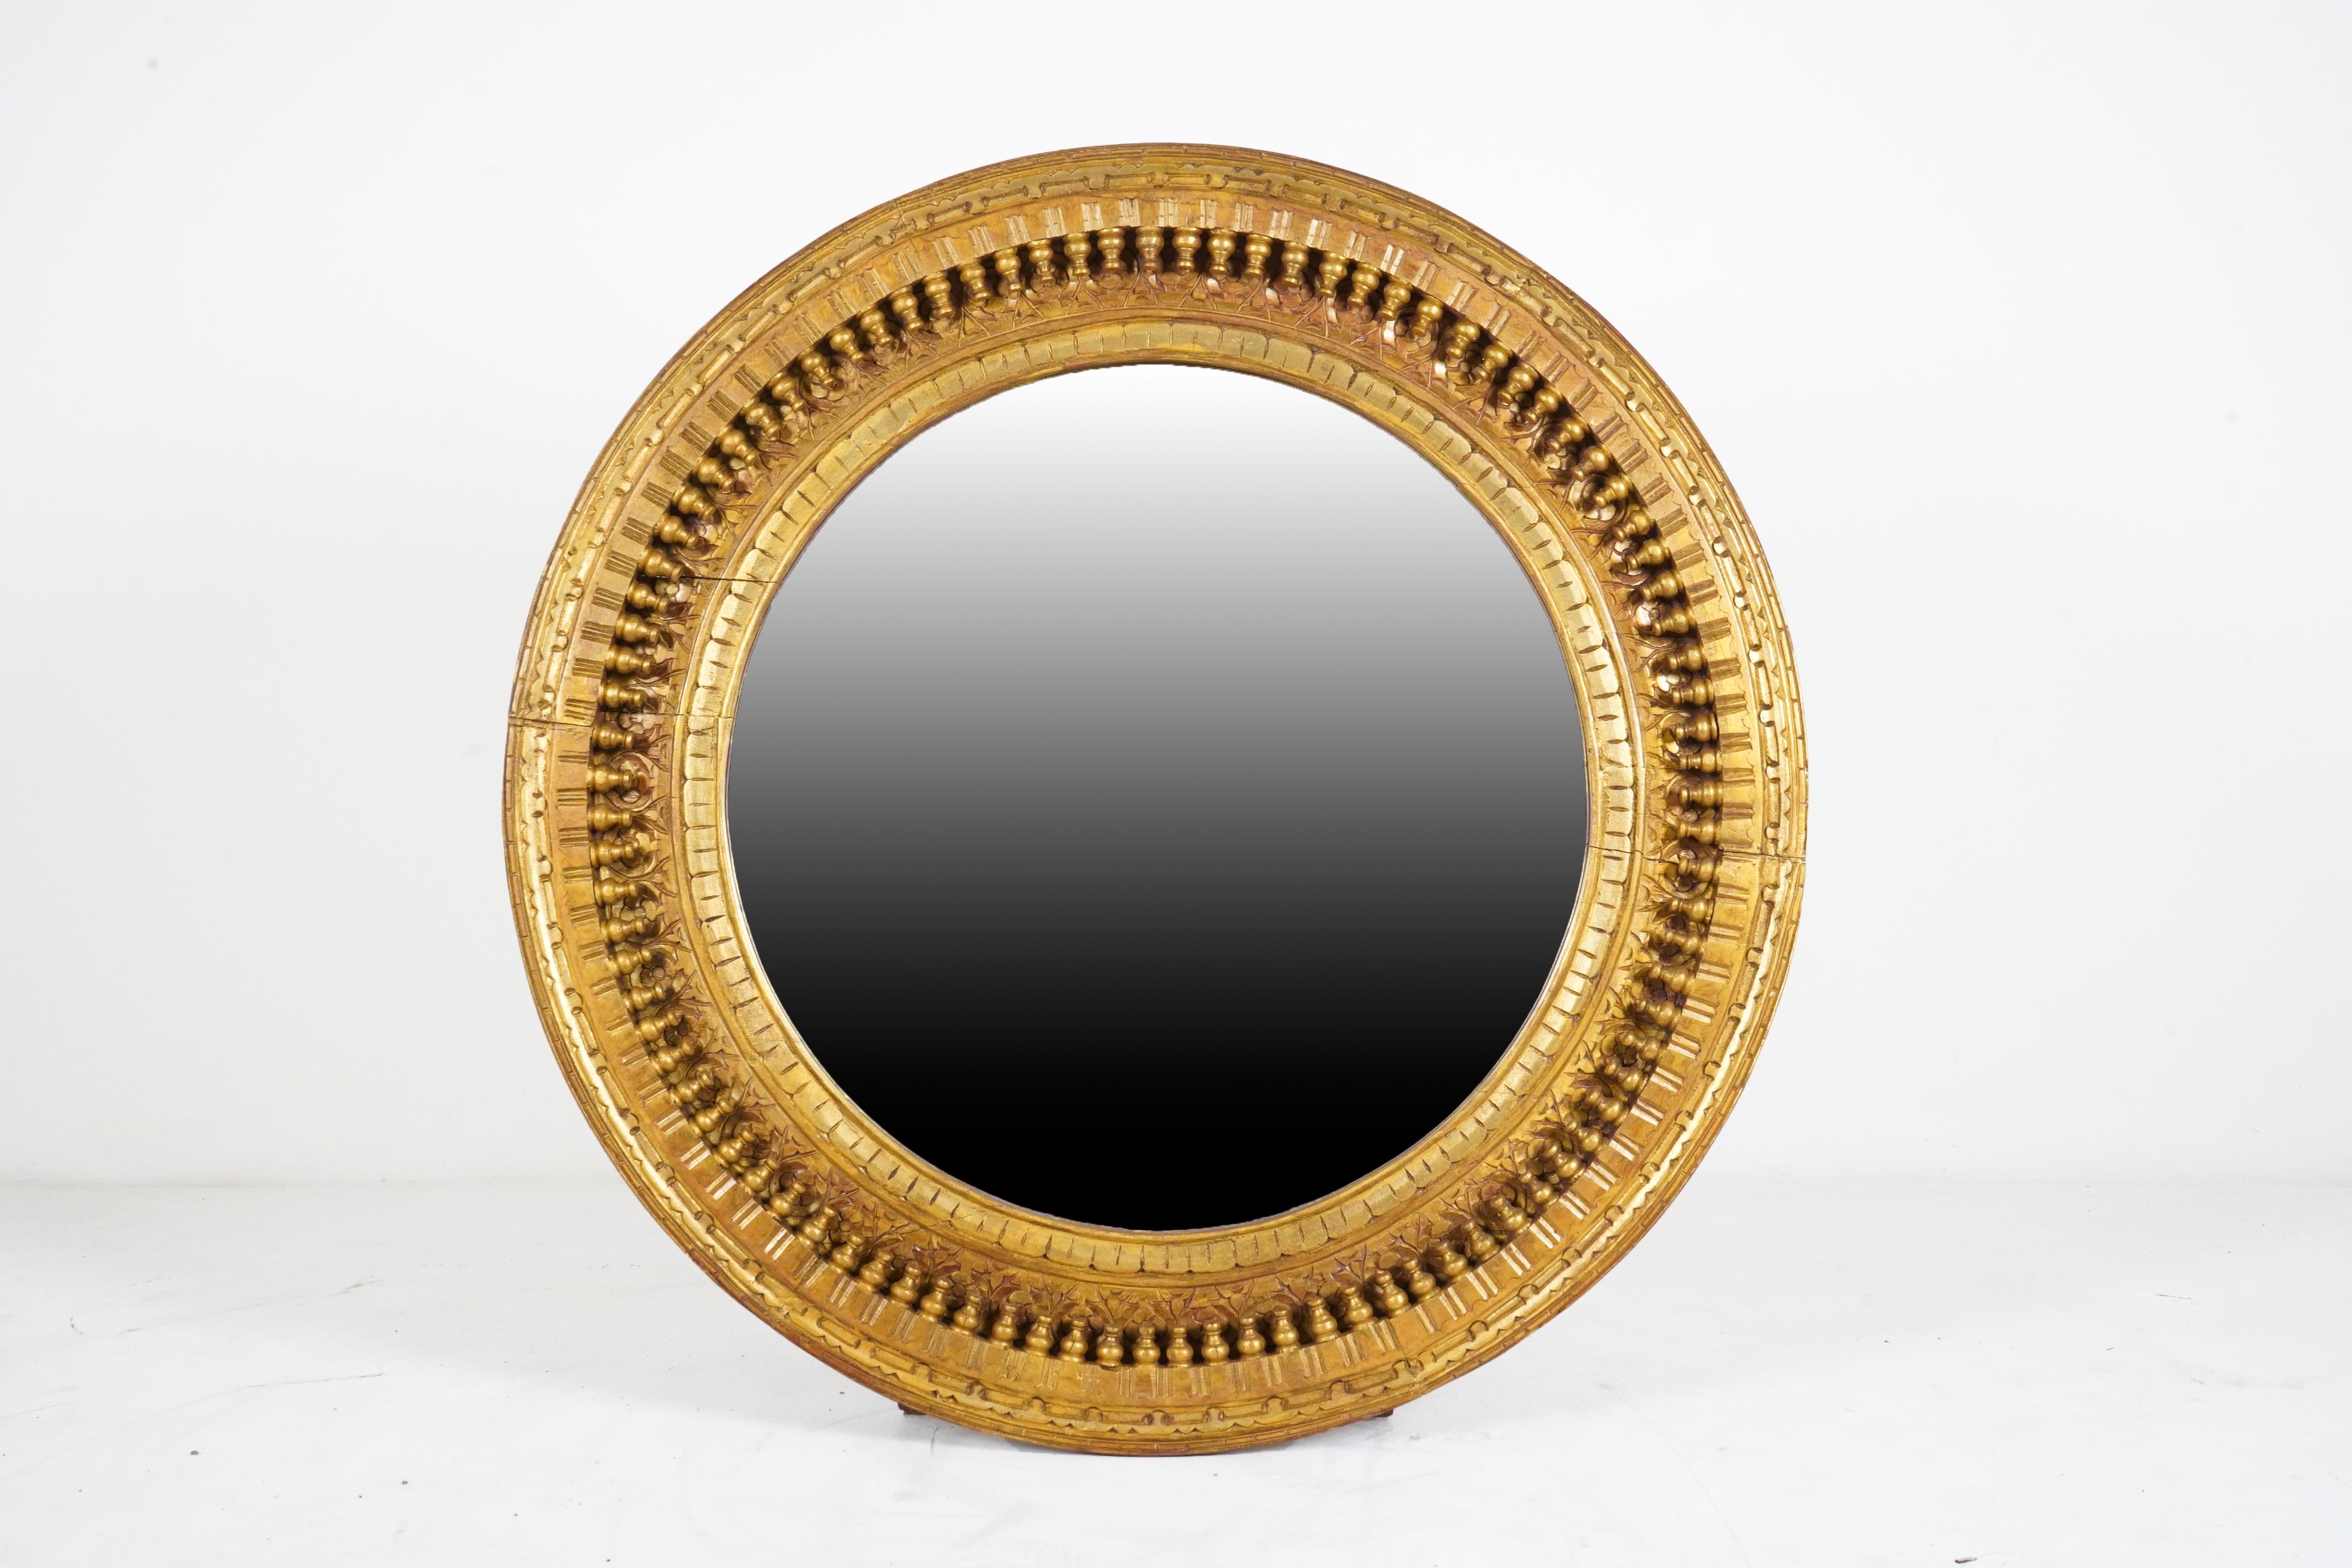 This large and intricate mirror frame was hand-carved from mango wood in India according to an 18th Century Mogul design. The piece is newly-carved and painted in gold pigments. The glass mirror is new and in perfect condition.